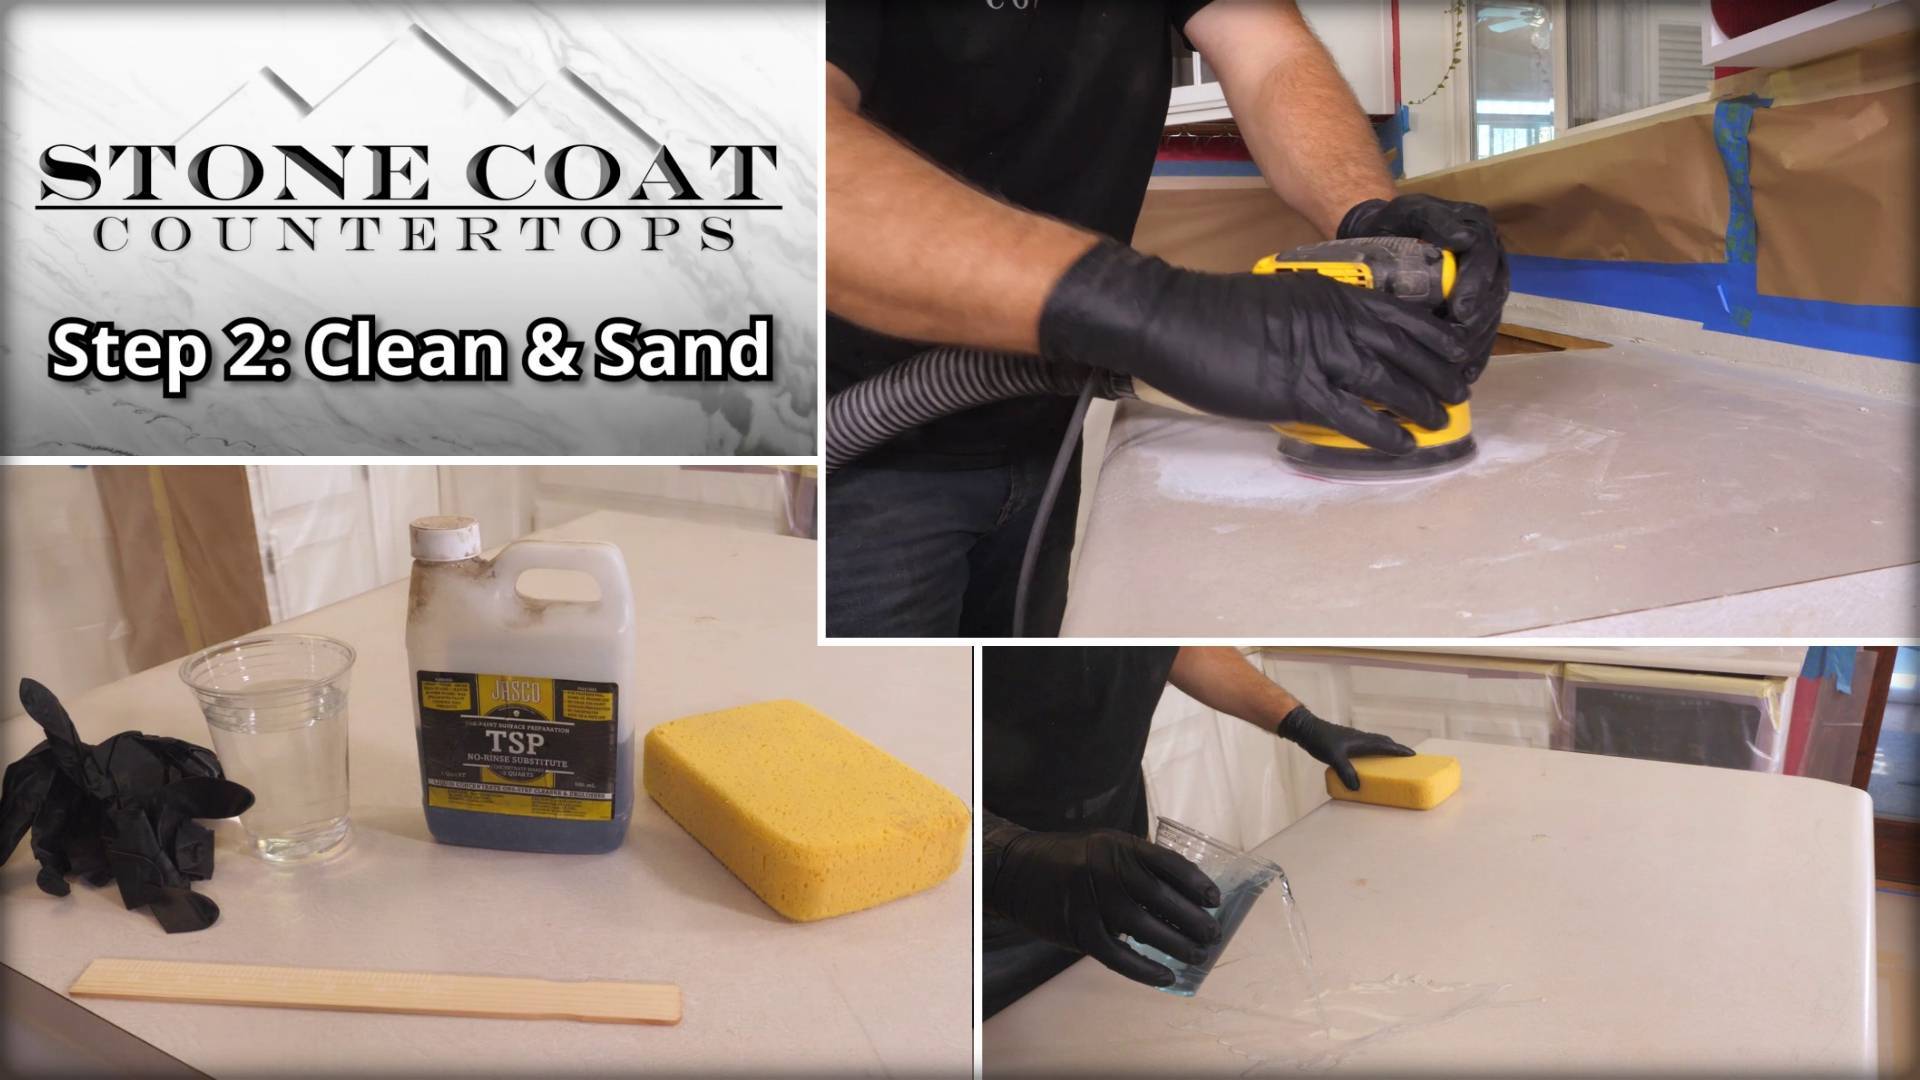 How to Apply Stone Coat Epoxy Countertops: Step-by-Step